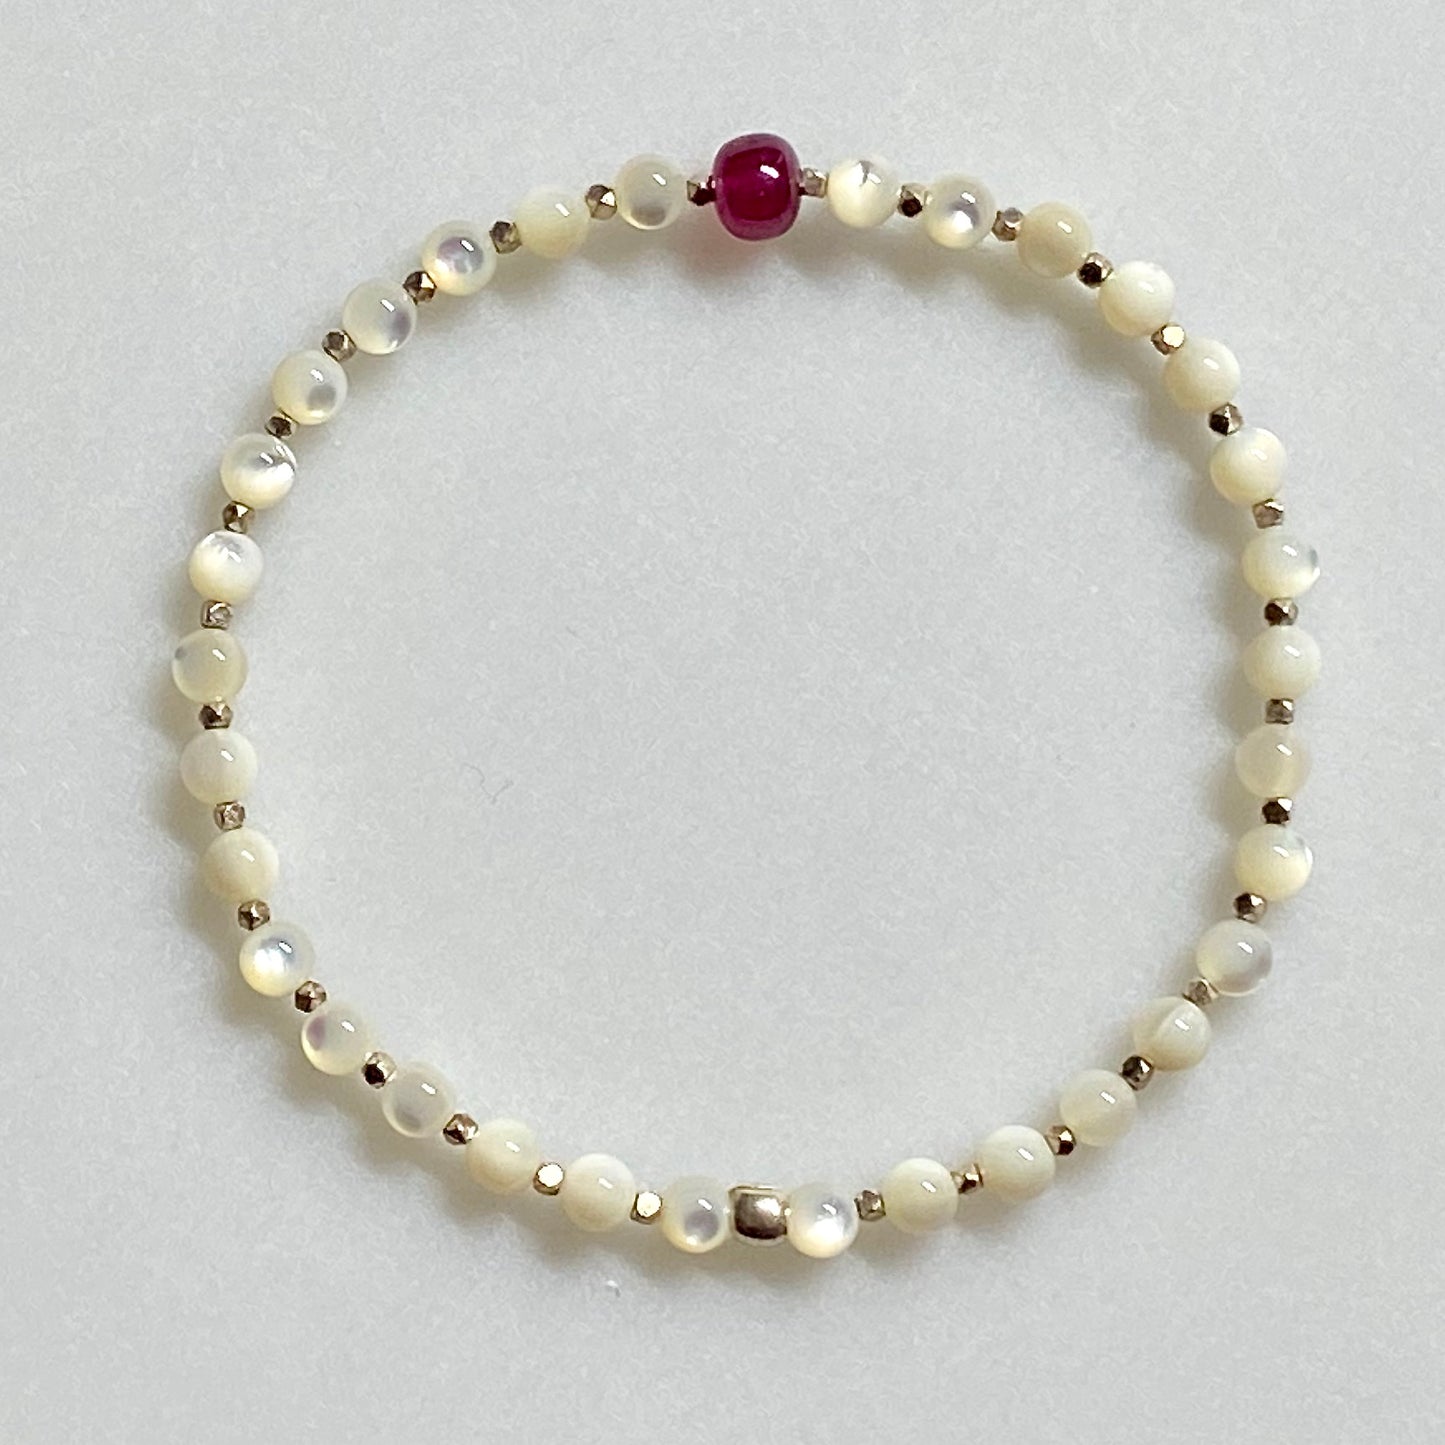 Arpaia gemstone stretch bracelet with natural ruby , mother or pearl, and 999 fine silver beads